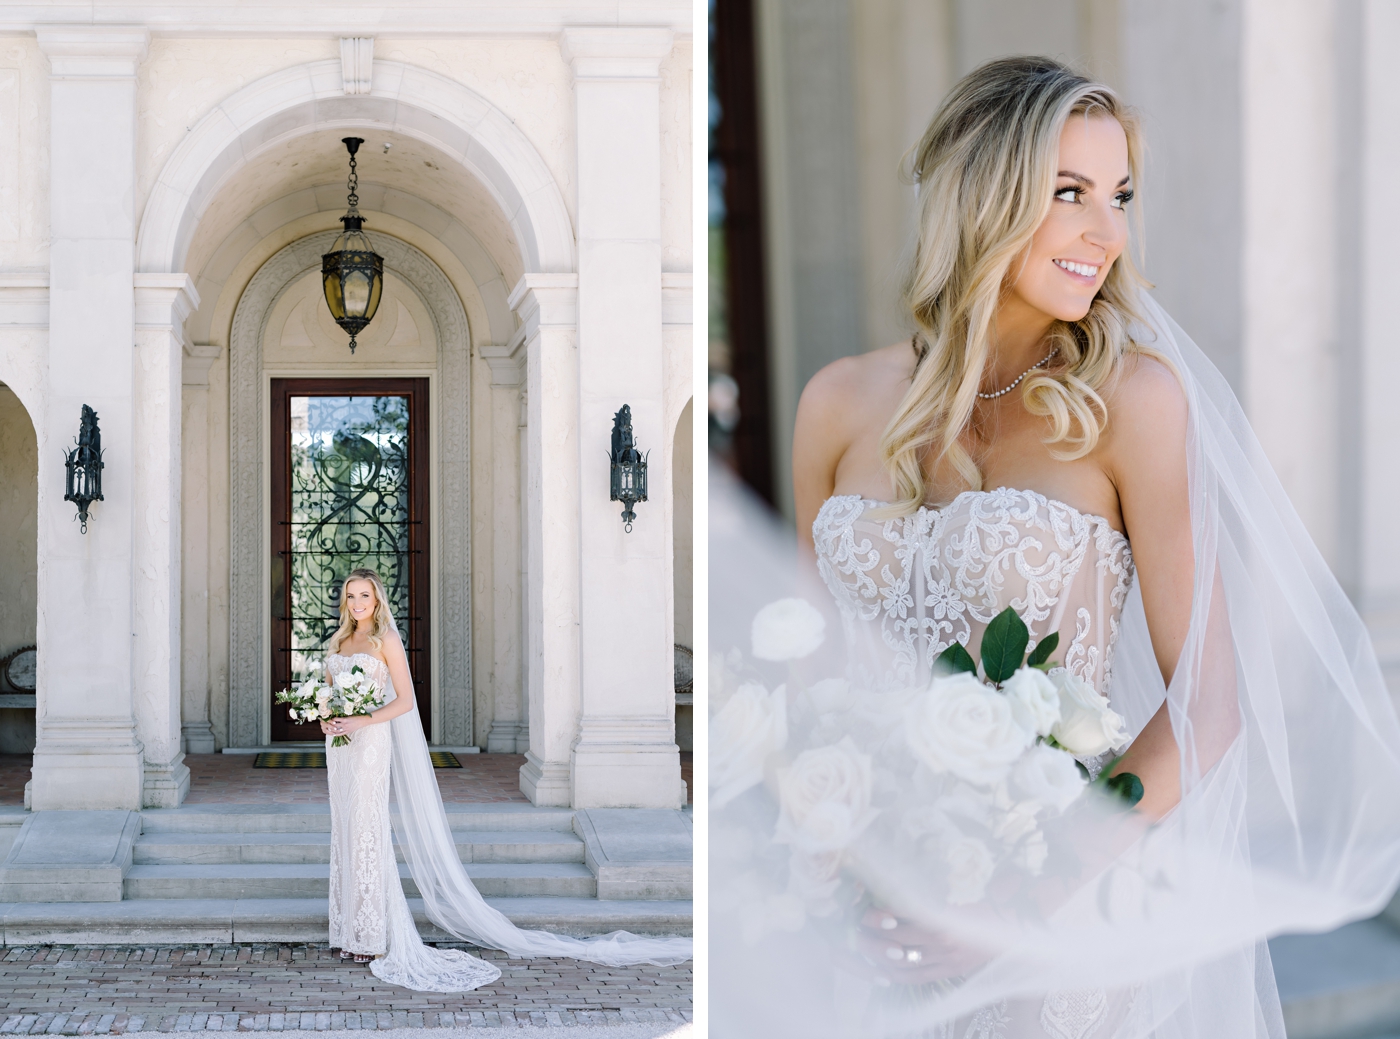 Bride in a lace gown by Adam Zohar, bouquet by Gypsy Floral